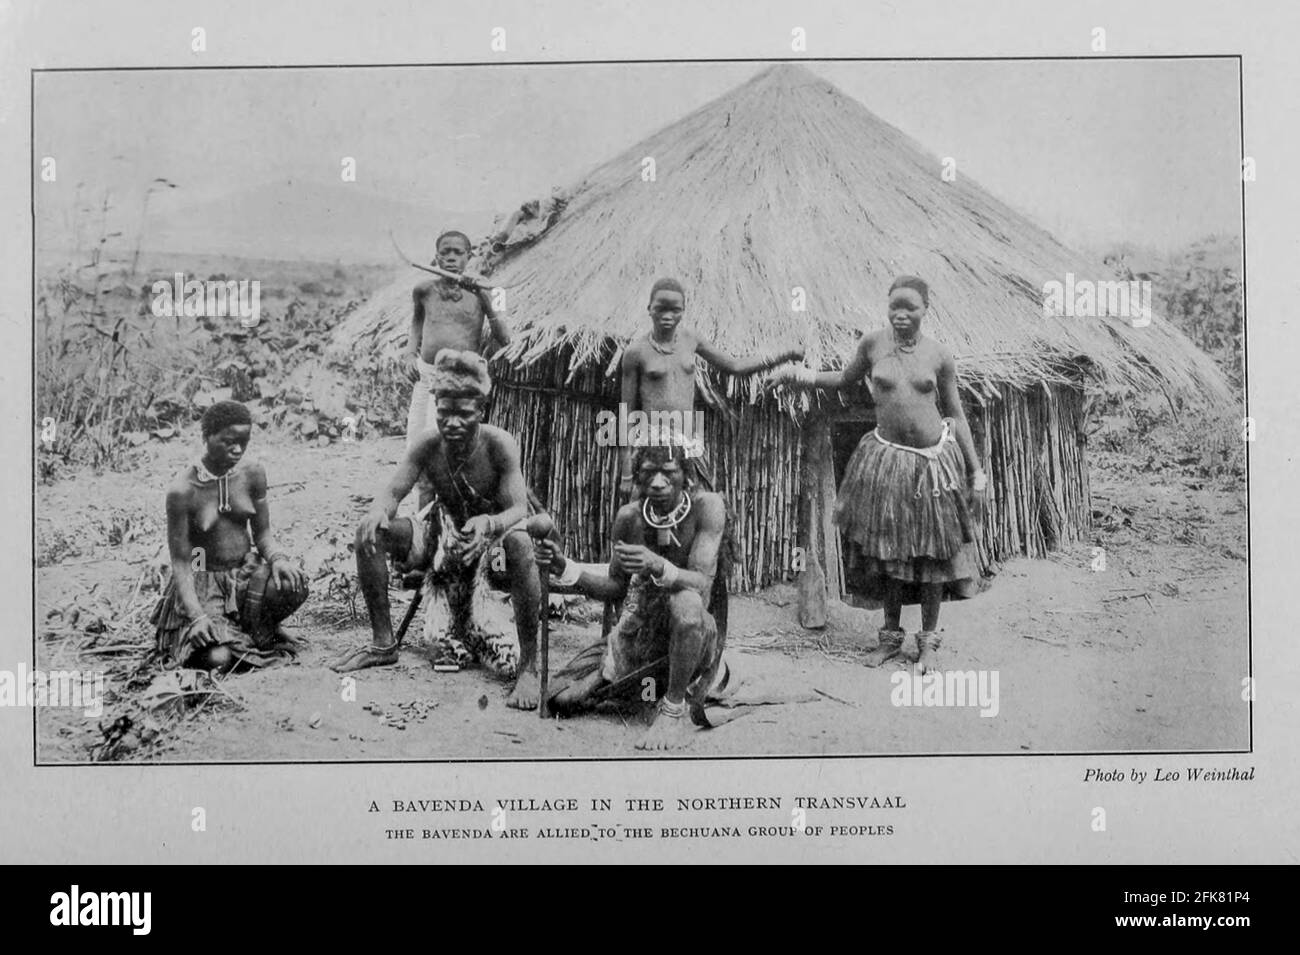 BAVENDA VILLAGE IN THE NORTHERN TRANSVAAL from the Book 'Britain across the Seas : Africa : A history and description of the British Empire in Africa' von Johnston, Harry Hamilton, Sir, 1858-1927 Veröffentlicht 1910 in London von National Society's Depository Stockfoto